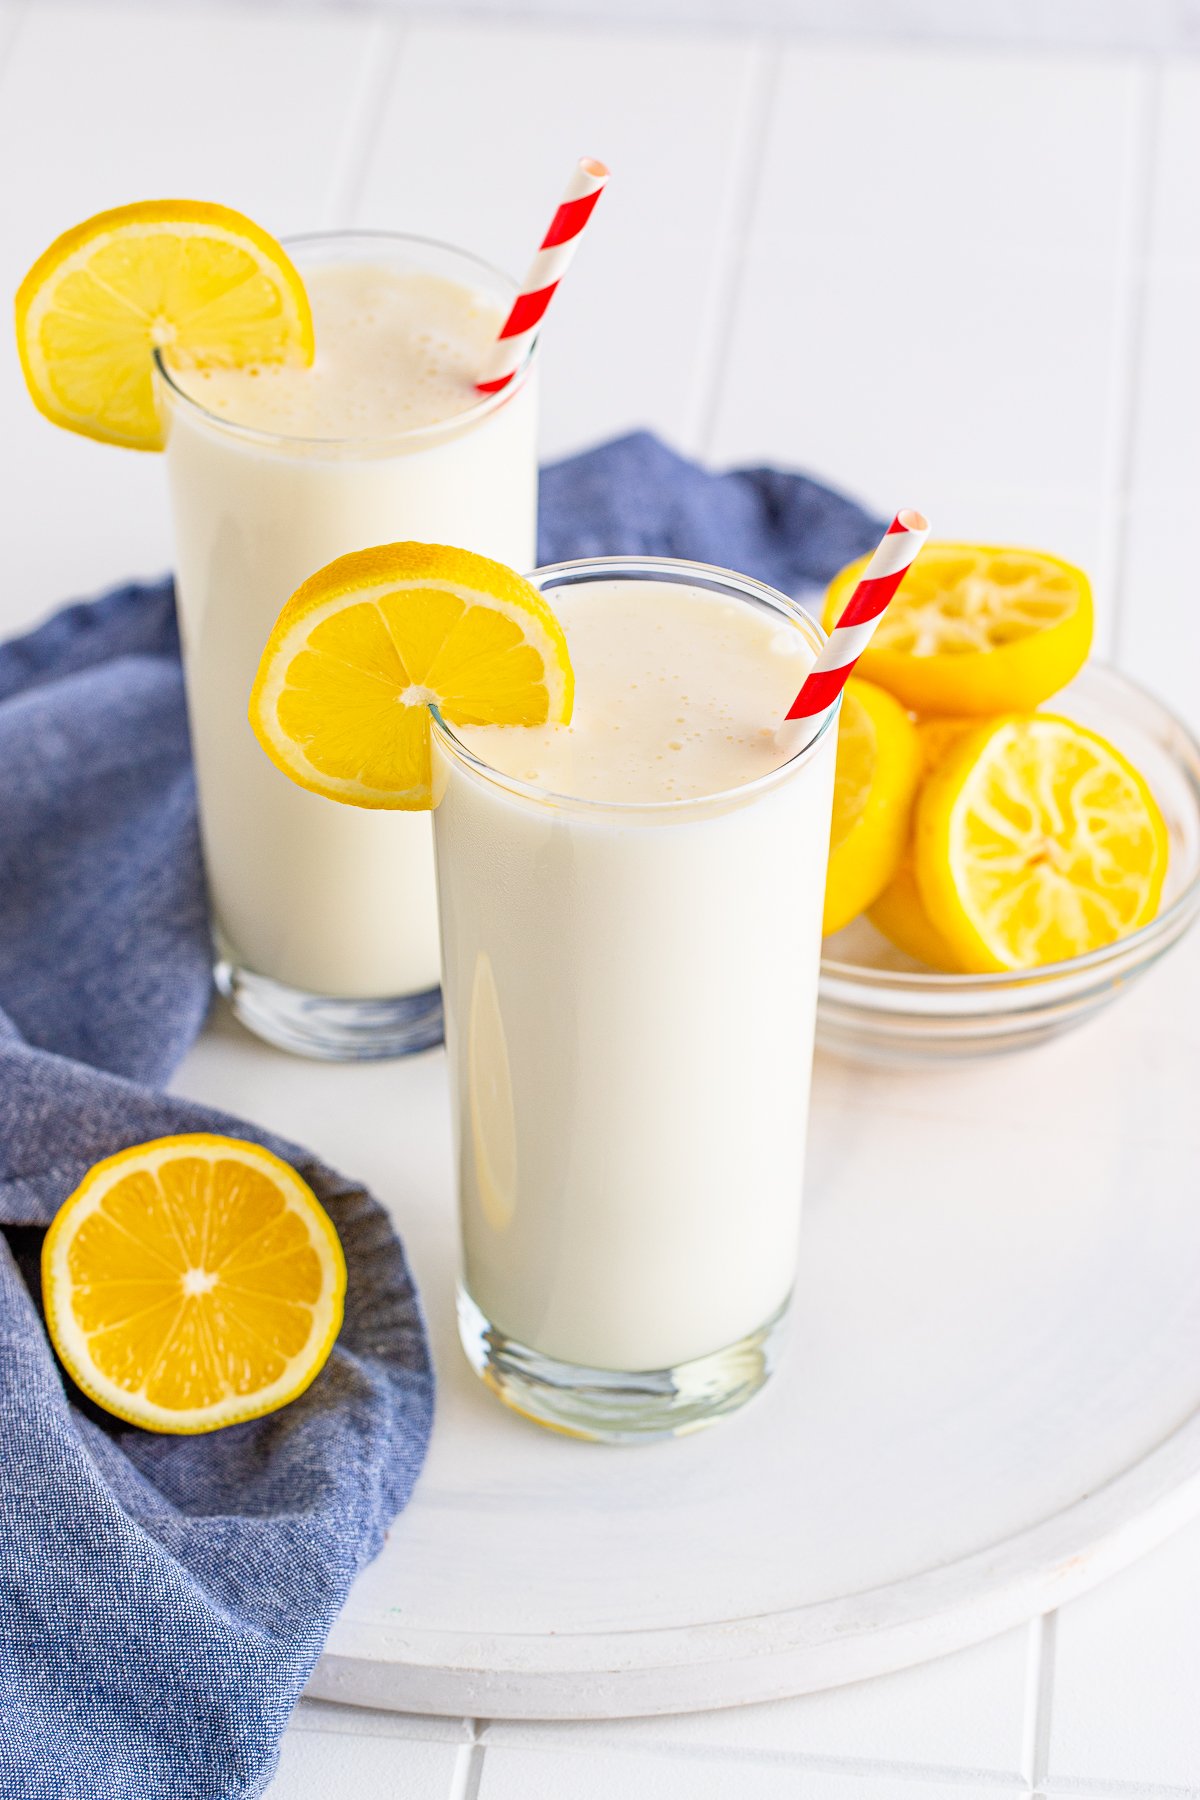 Two glasses of Frosted Lemonade on white board with lemons.